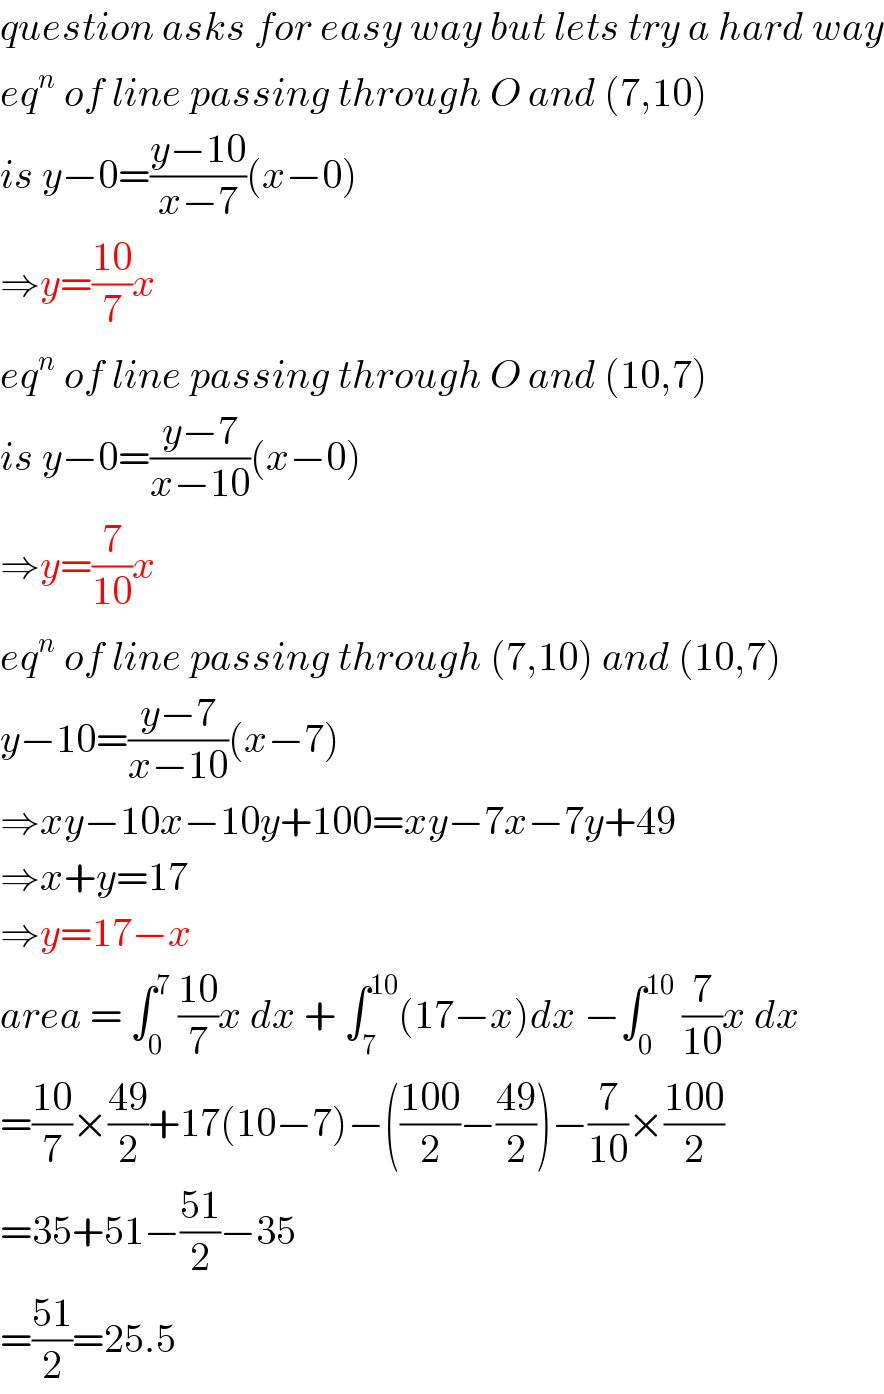 question asks for easy way but lets try a hard way  eq^n  of line passing through O and (7,10)  is y−0=((y−10)/(x−7))(x−0)  ⇒y=((10)/7)x  eq^n  of line passing through O and (10,7)  is y−0=((y−7)/(x−10))(x−0)  ⇒y=(7/(10))x  eq^n  of line passing through (7,10) and (10,7)  y−10=((y−7)/(x−10))(x−7)  ⇒xy−10x−10y+100=xy−7x−7y+49  ⇒x+y=17  ⇒y=17−x  area = ∫_0 ^7  ((10)/7)x dx + ∫_7 ^(10) (17−x)dx −∫_0 ^(10)  (7/(10))x dx   =((10)/7)×((49)/2)+17(10−7)−(((100)/2)−((49)/2))−(7/(10))×((100)/2)  =35+51−((51)/2)−35  =((51)/2)=25.5  